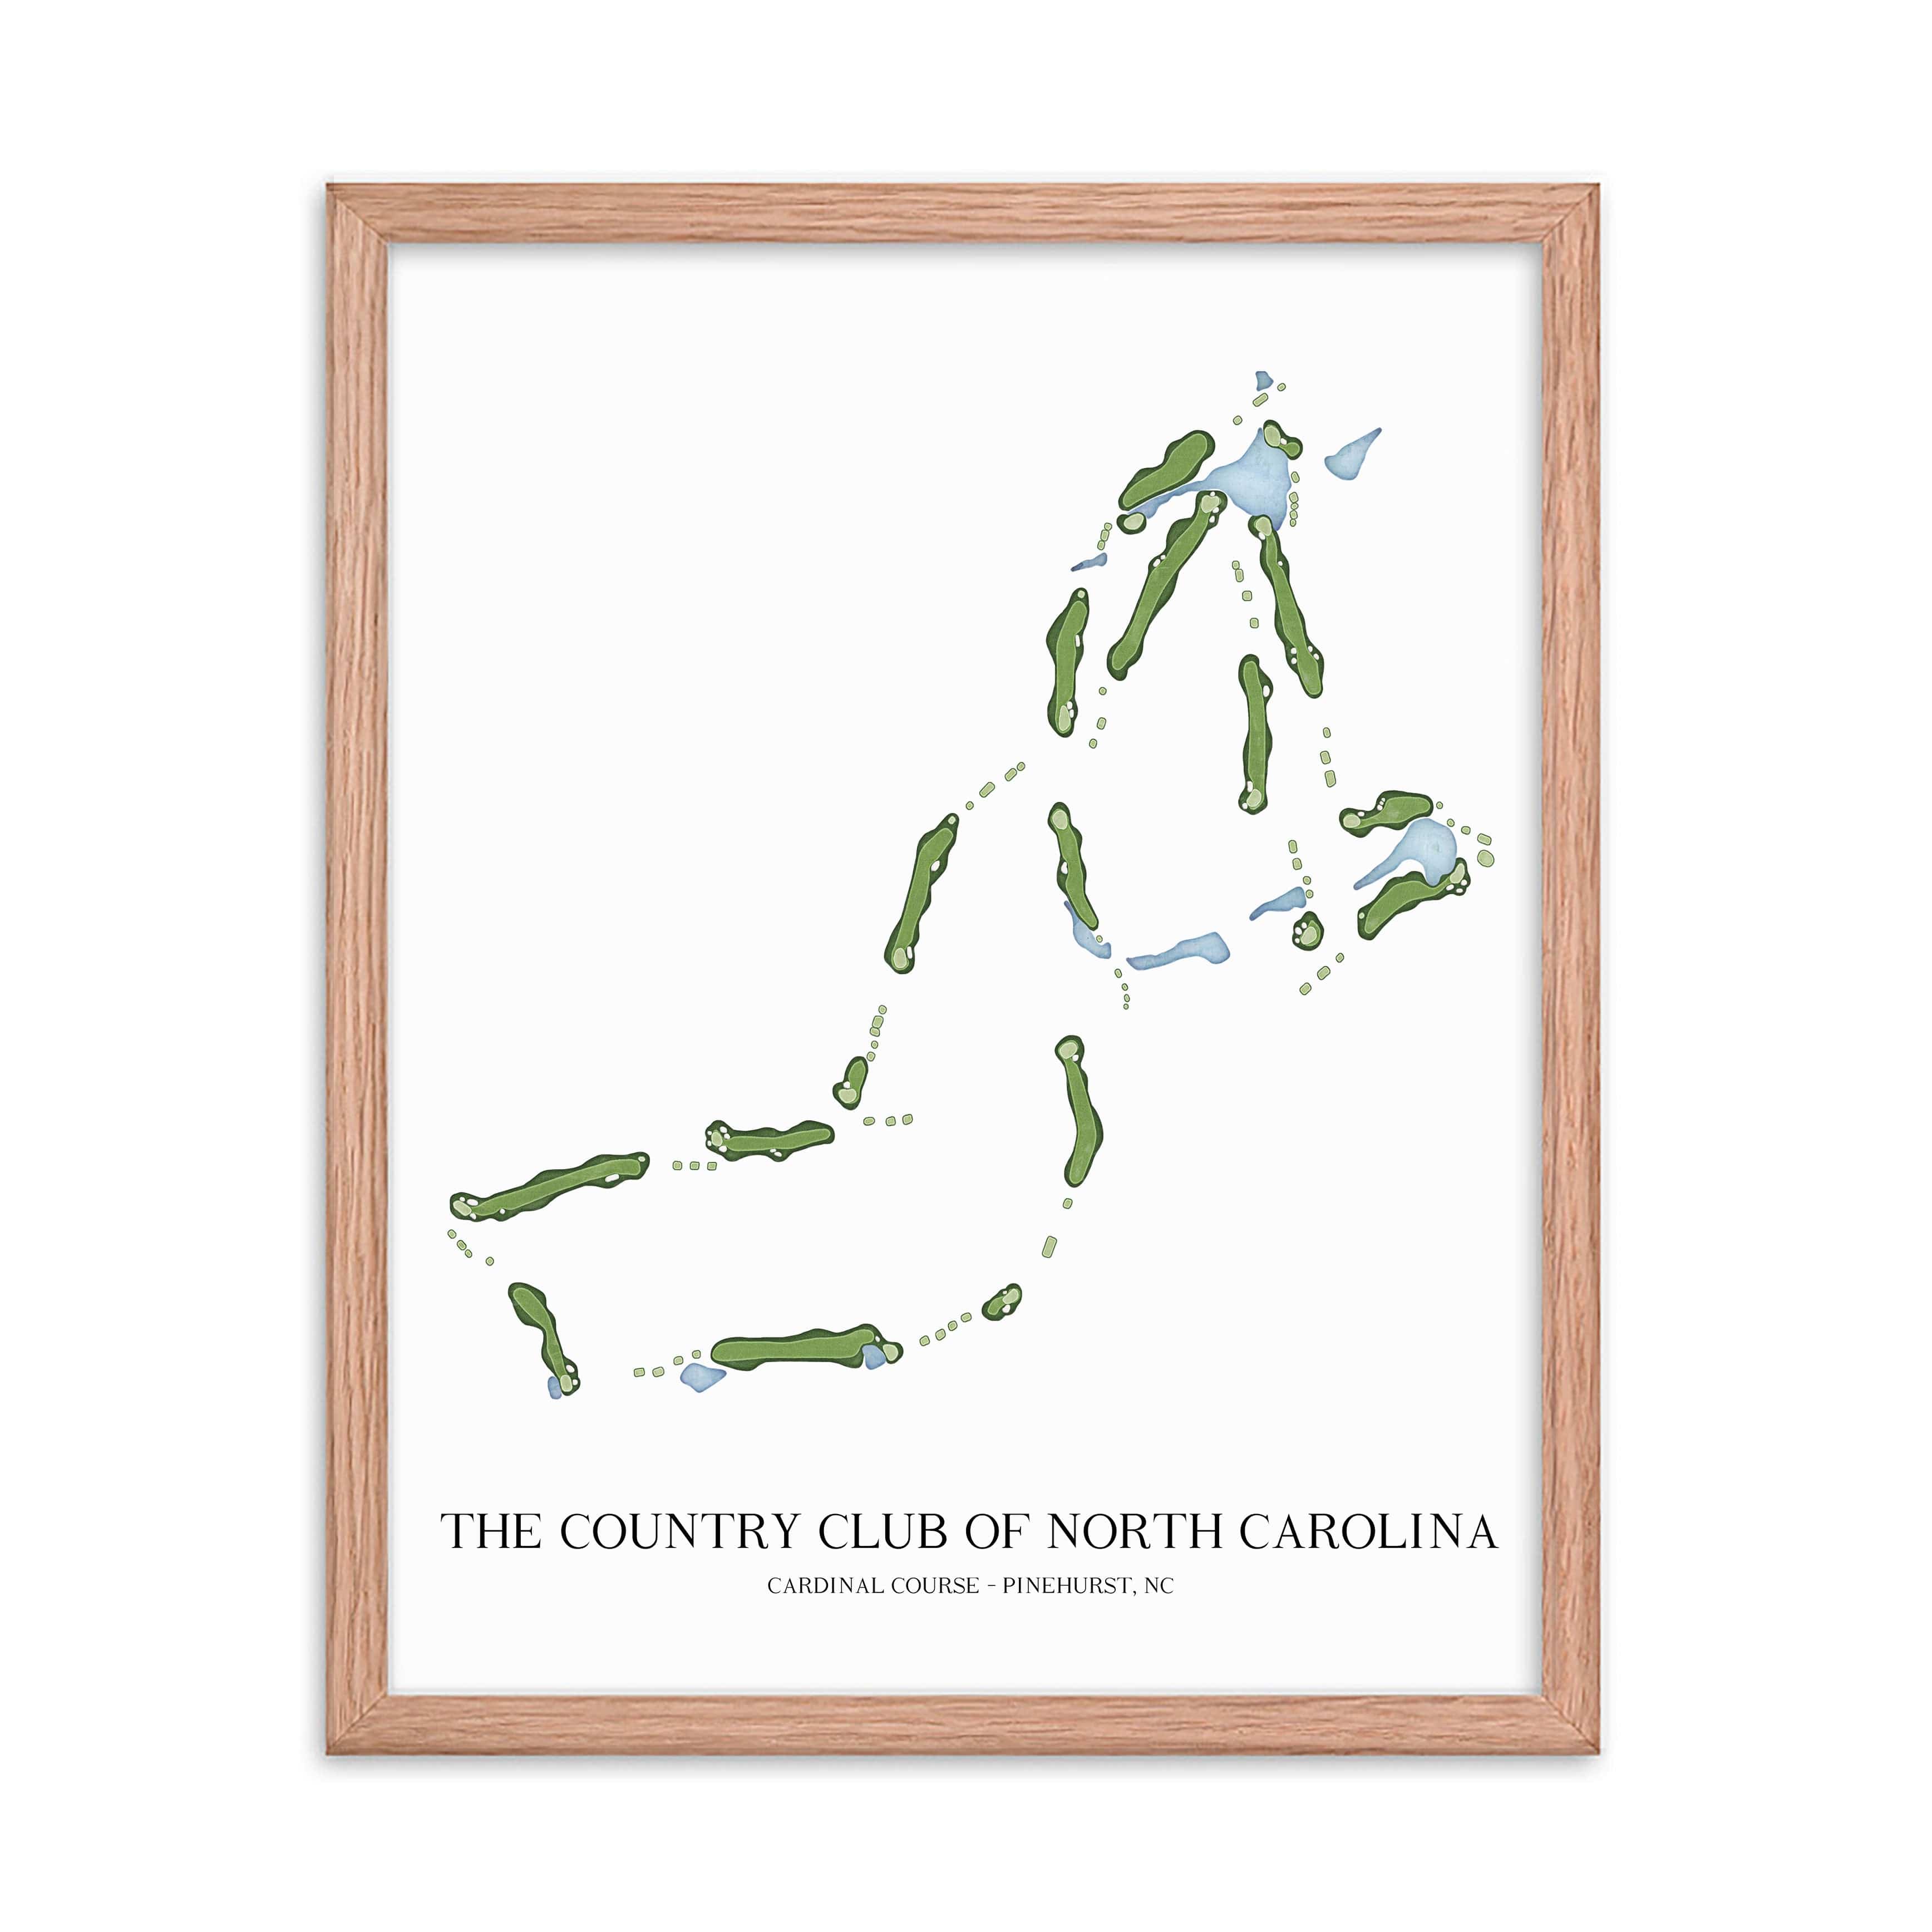 The 19th Hole Golf Shop - Golf Course Prints -  The Country Club of North Carolina - Cardinal Golf Course Map